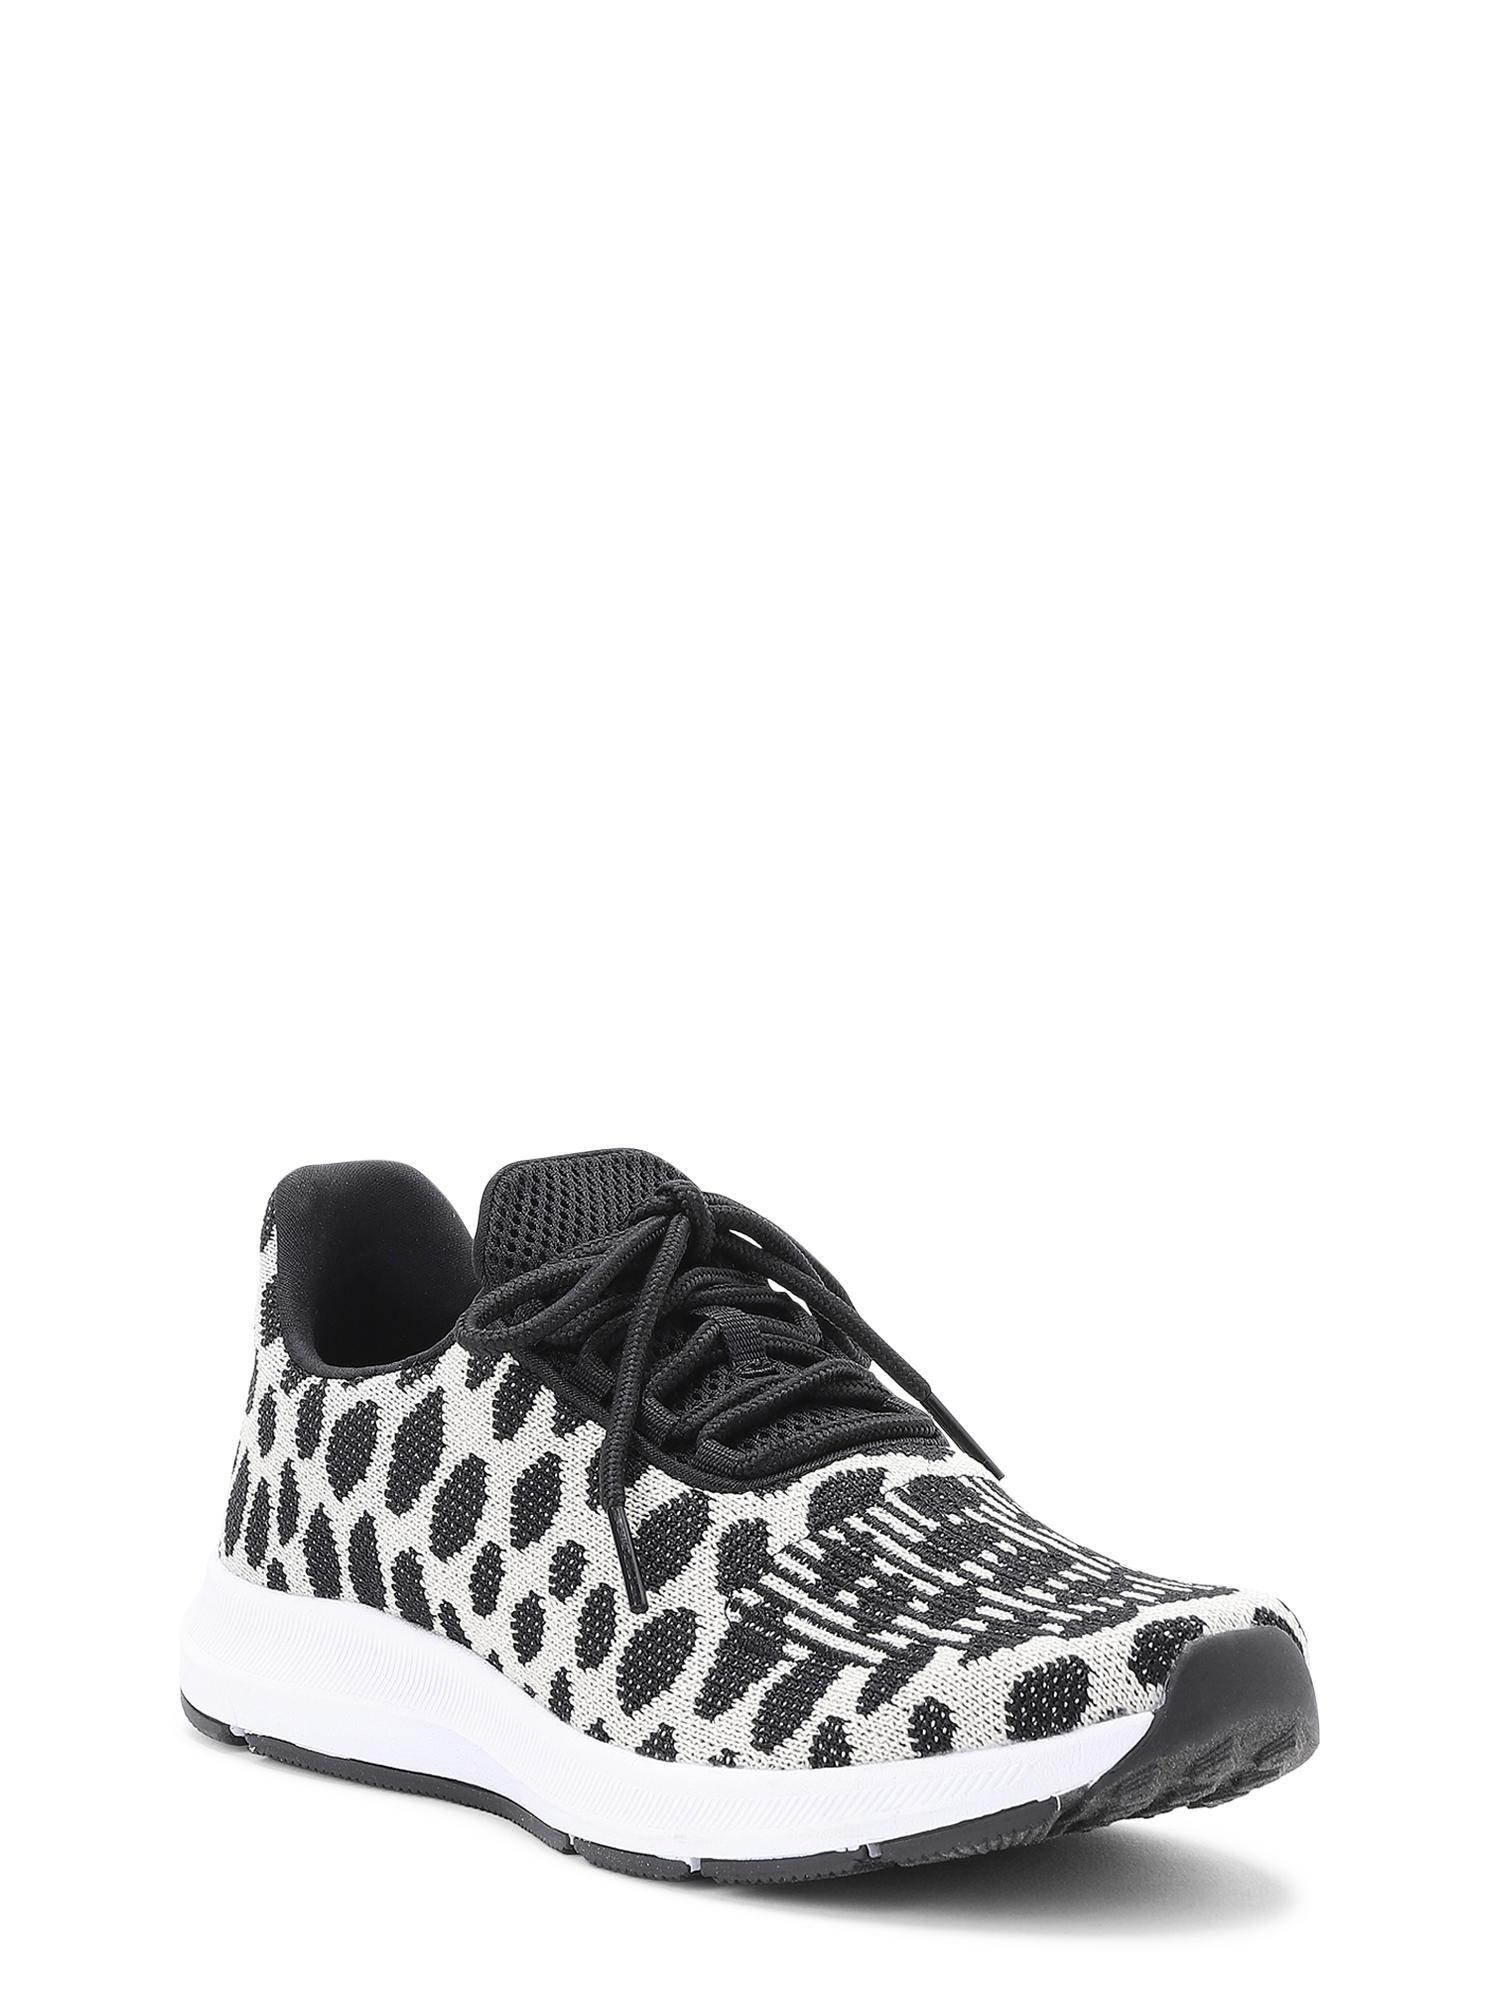 leopard running shoes